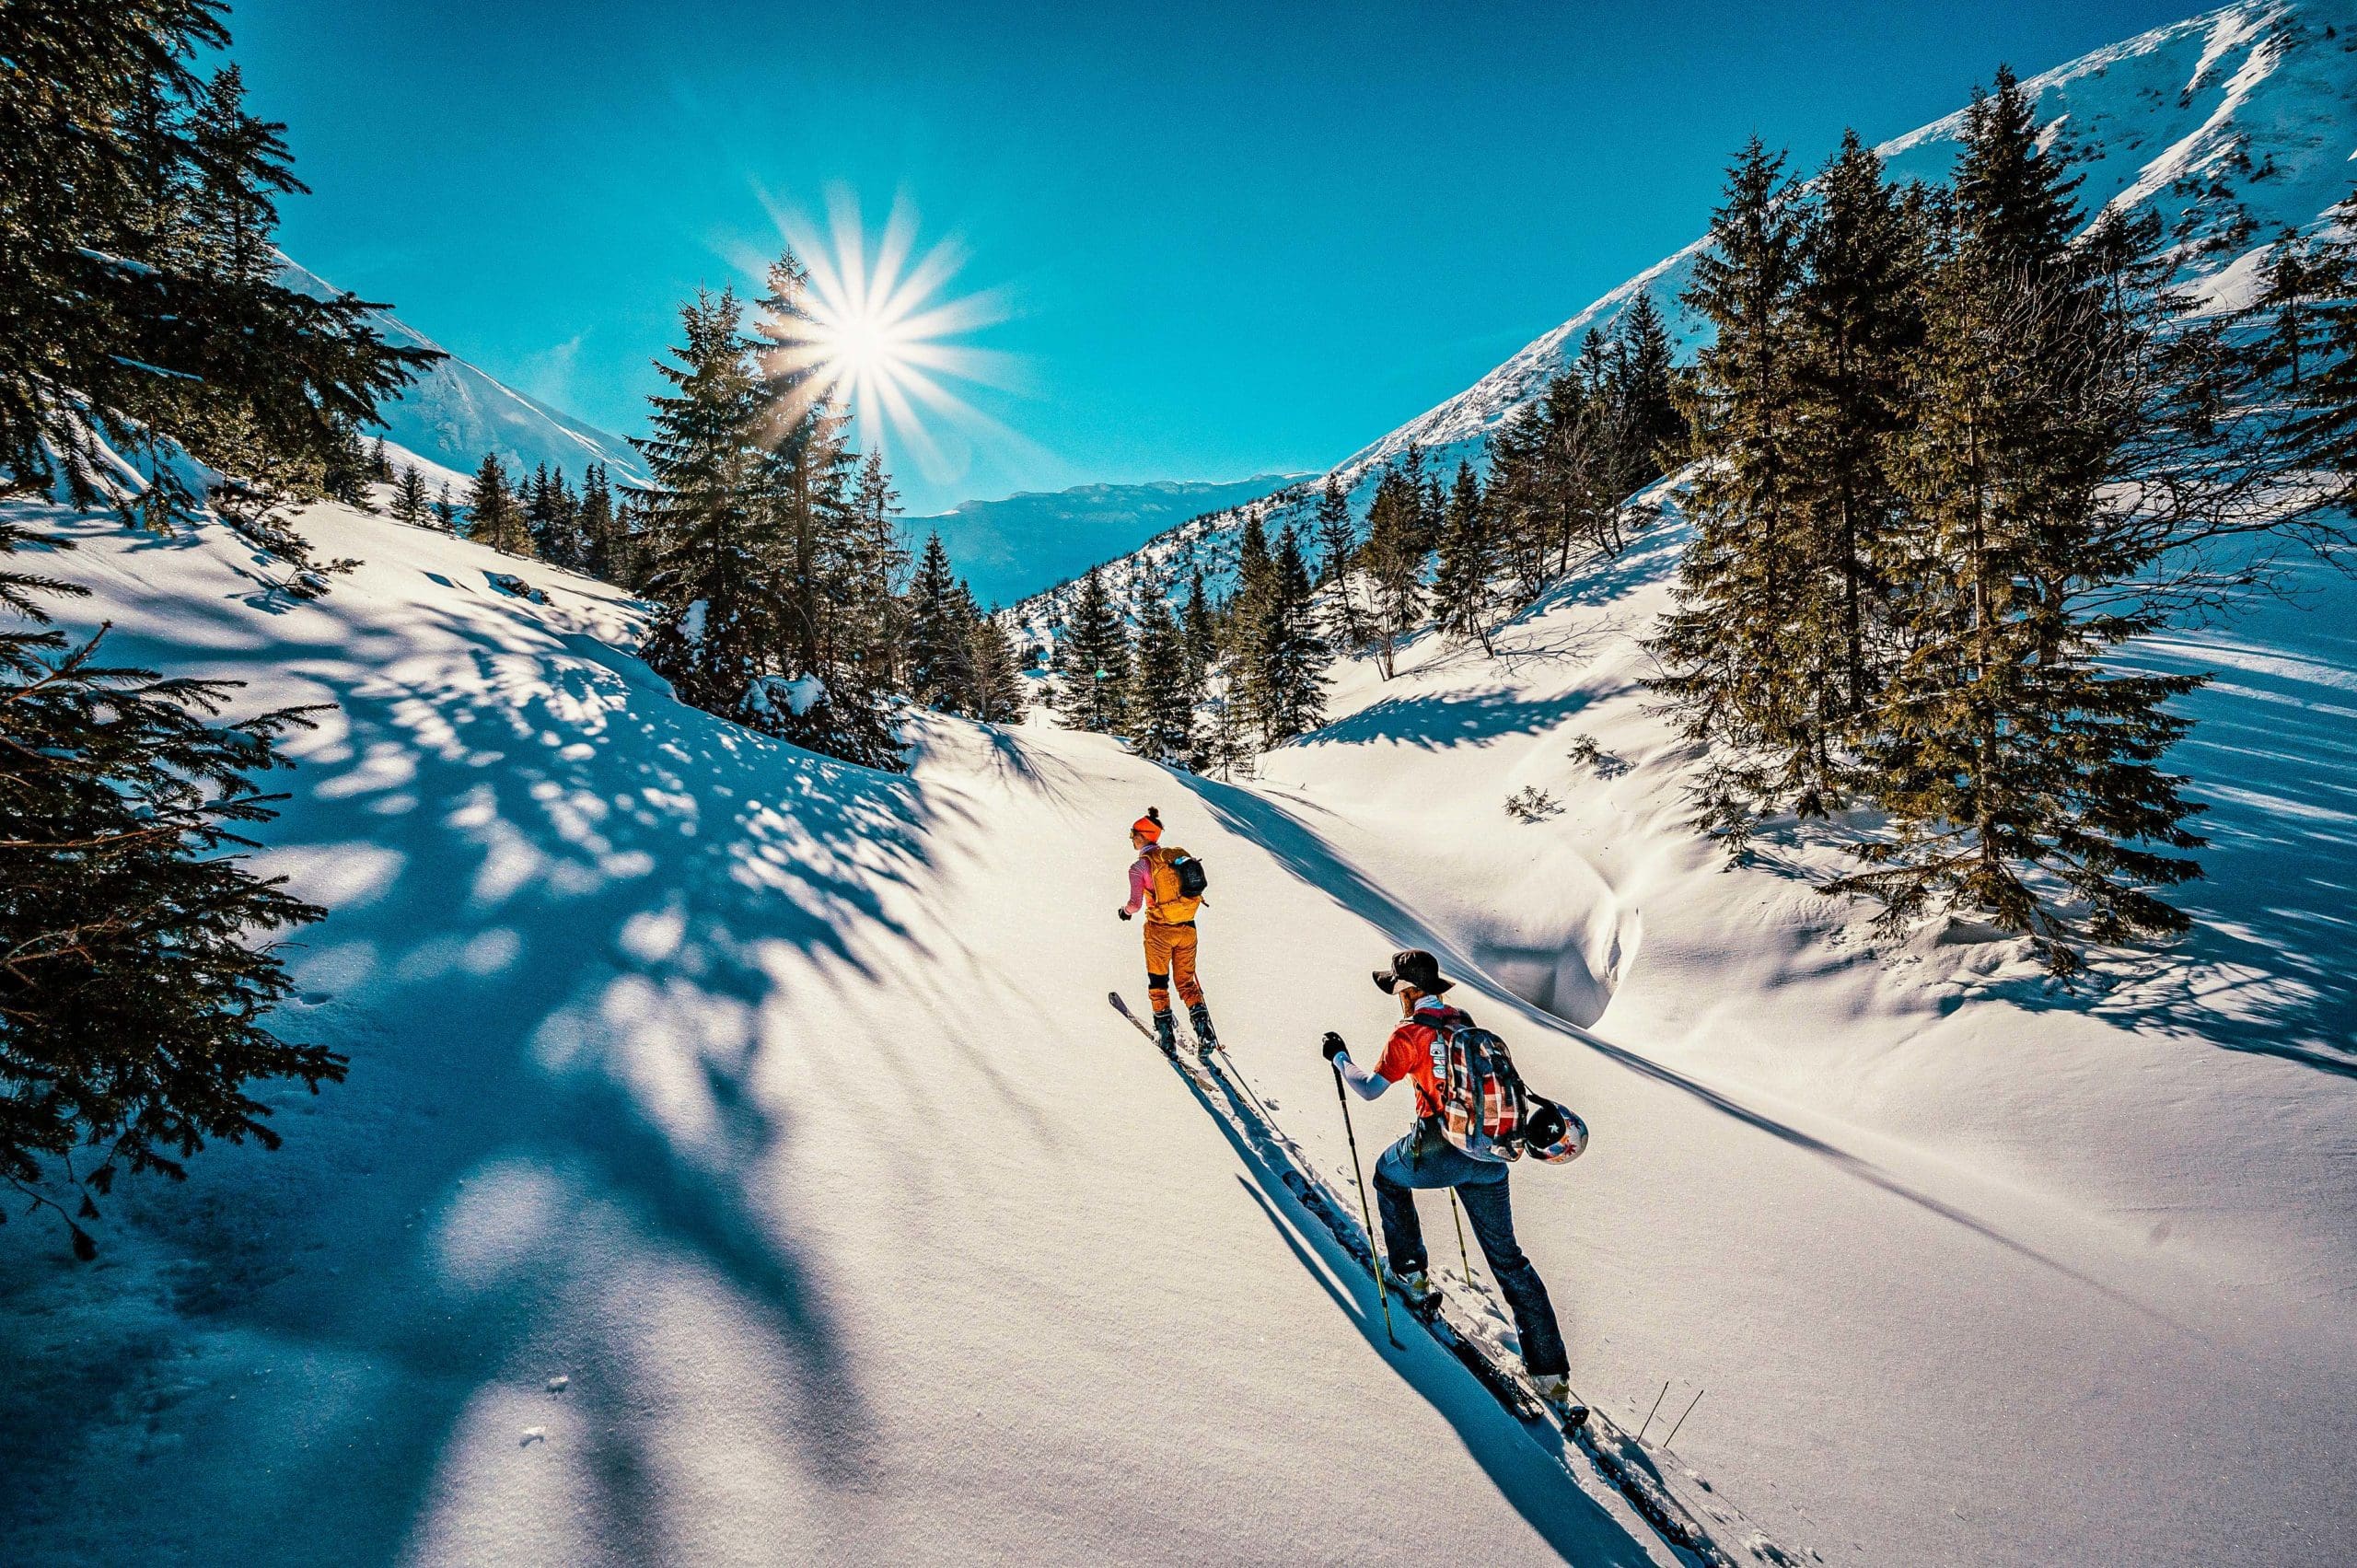 Evo’s Backcountry Ski Classes Are Available Now